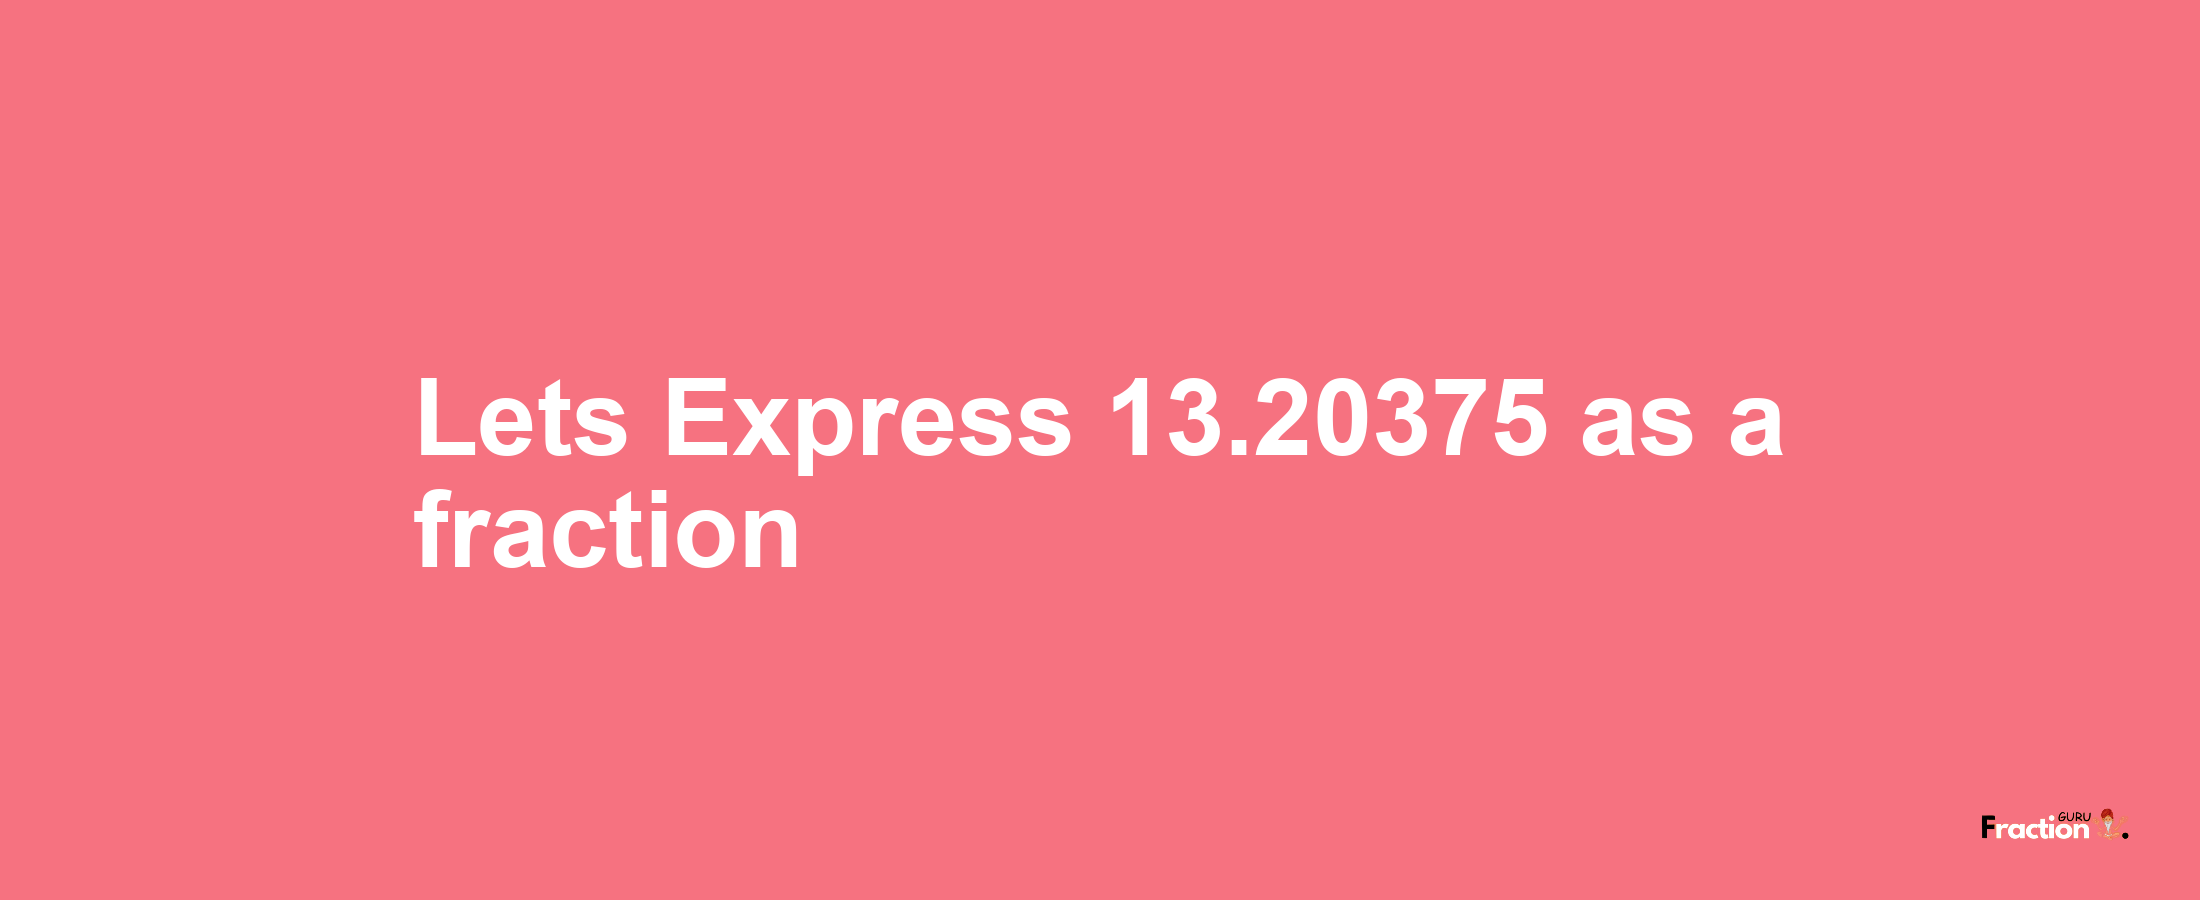 Lets Express 13.20375 as afraction